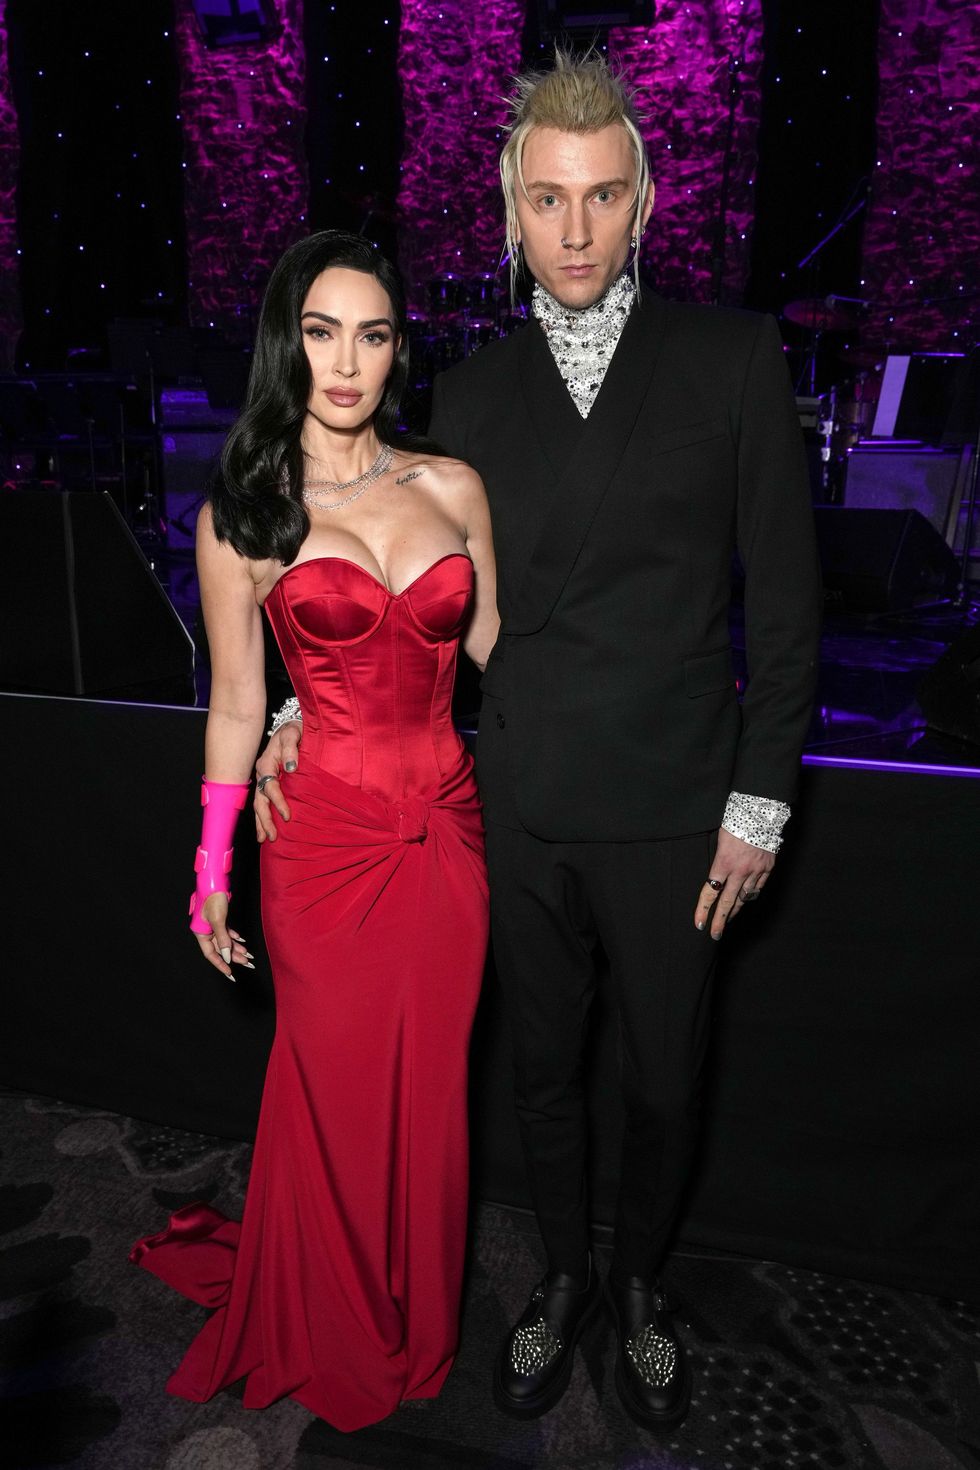 megan-fox-goes-to-grammys-party-with-a-broken-wrist-and-still-looks-glam